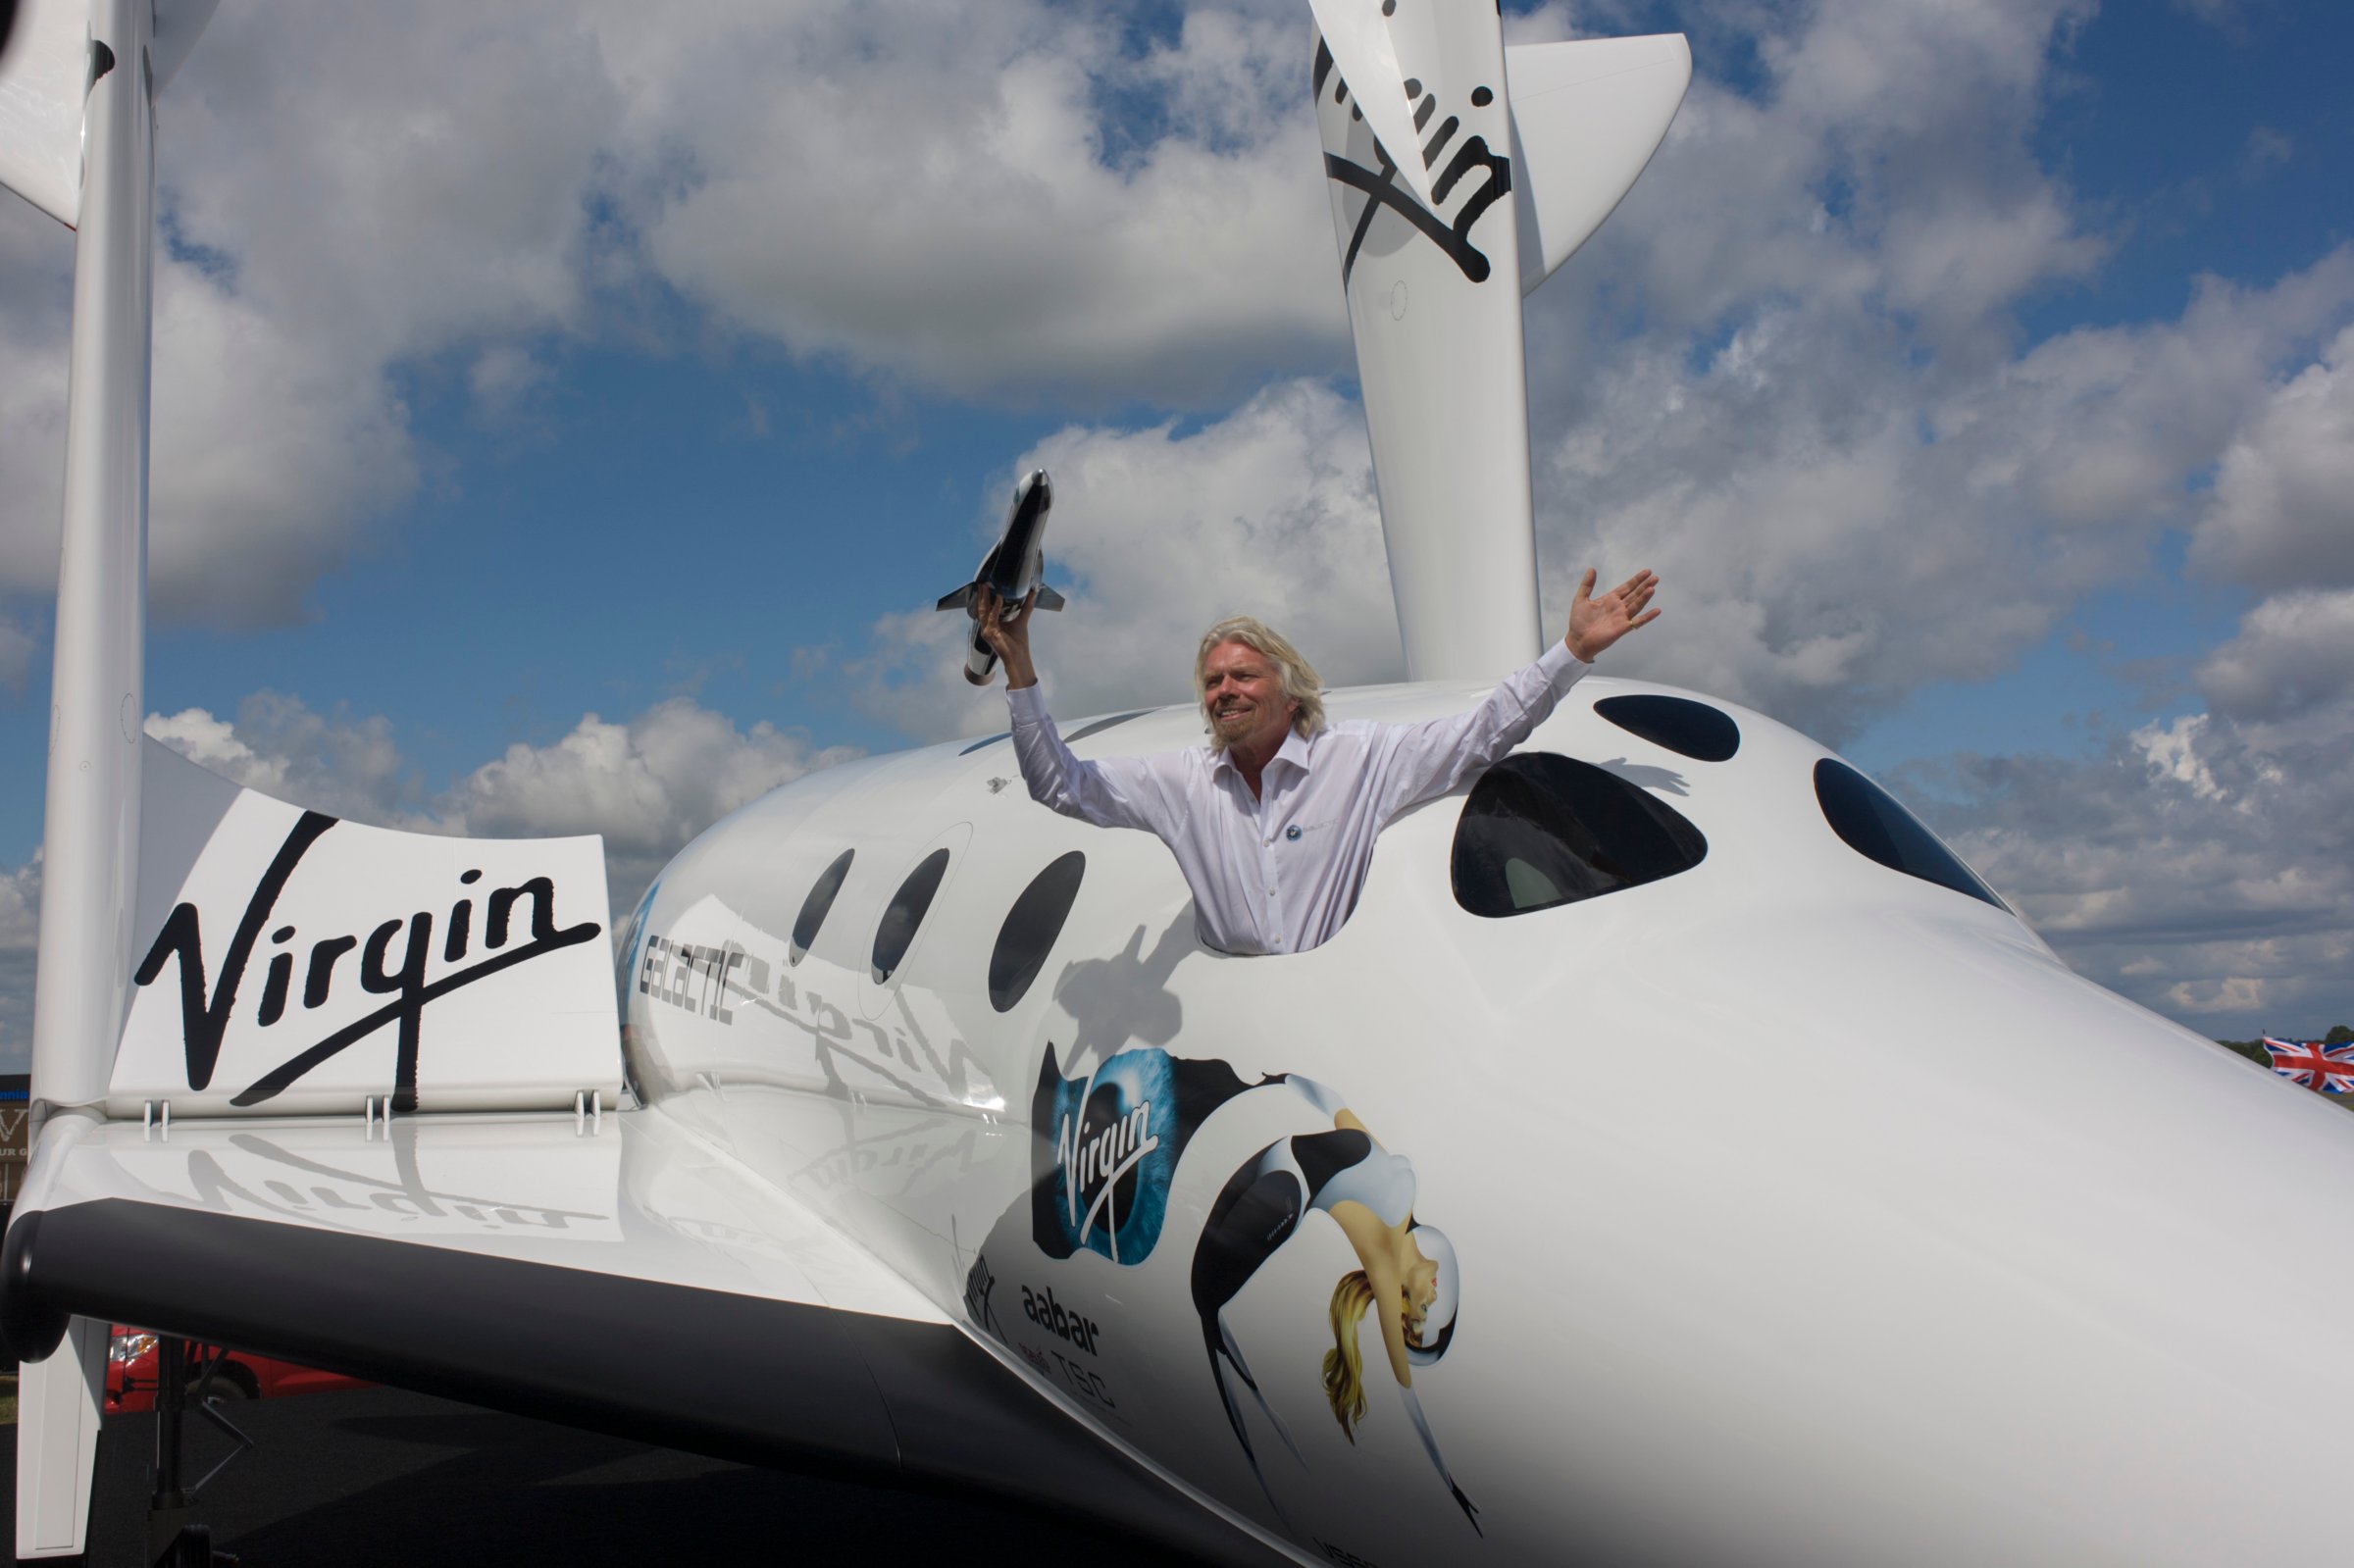 Alongside his SpaceShipTwo vehicle, Richard Branson holds model of satellite LauncherOne after Virgin Galactic space tourism presentation at the 2012 Farnborough Air Show.